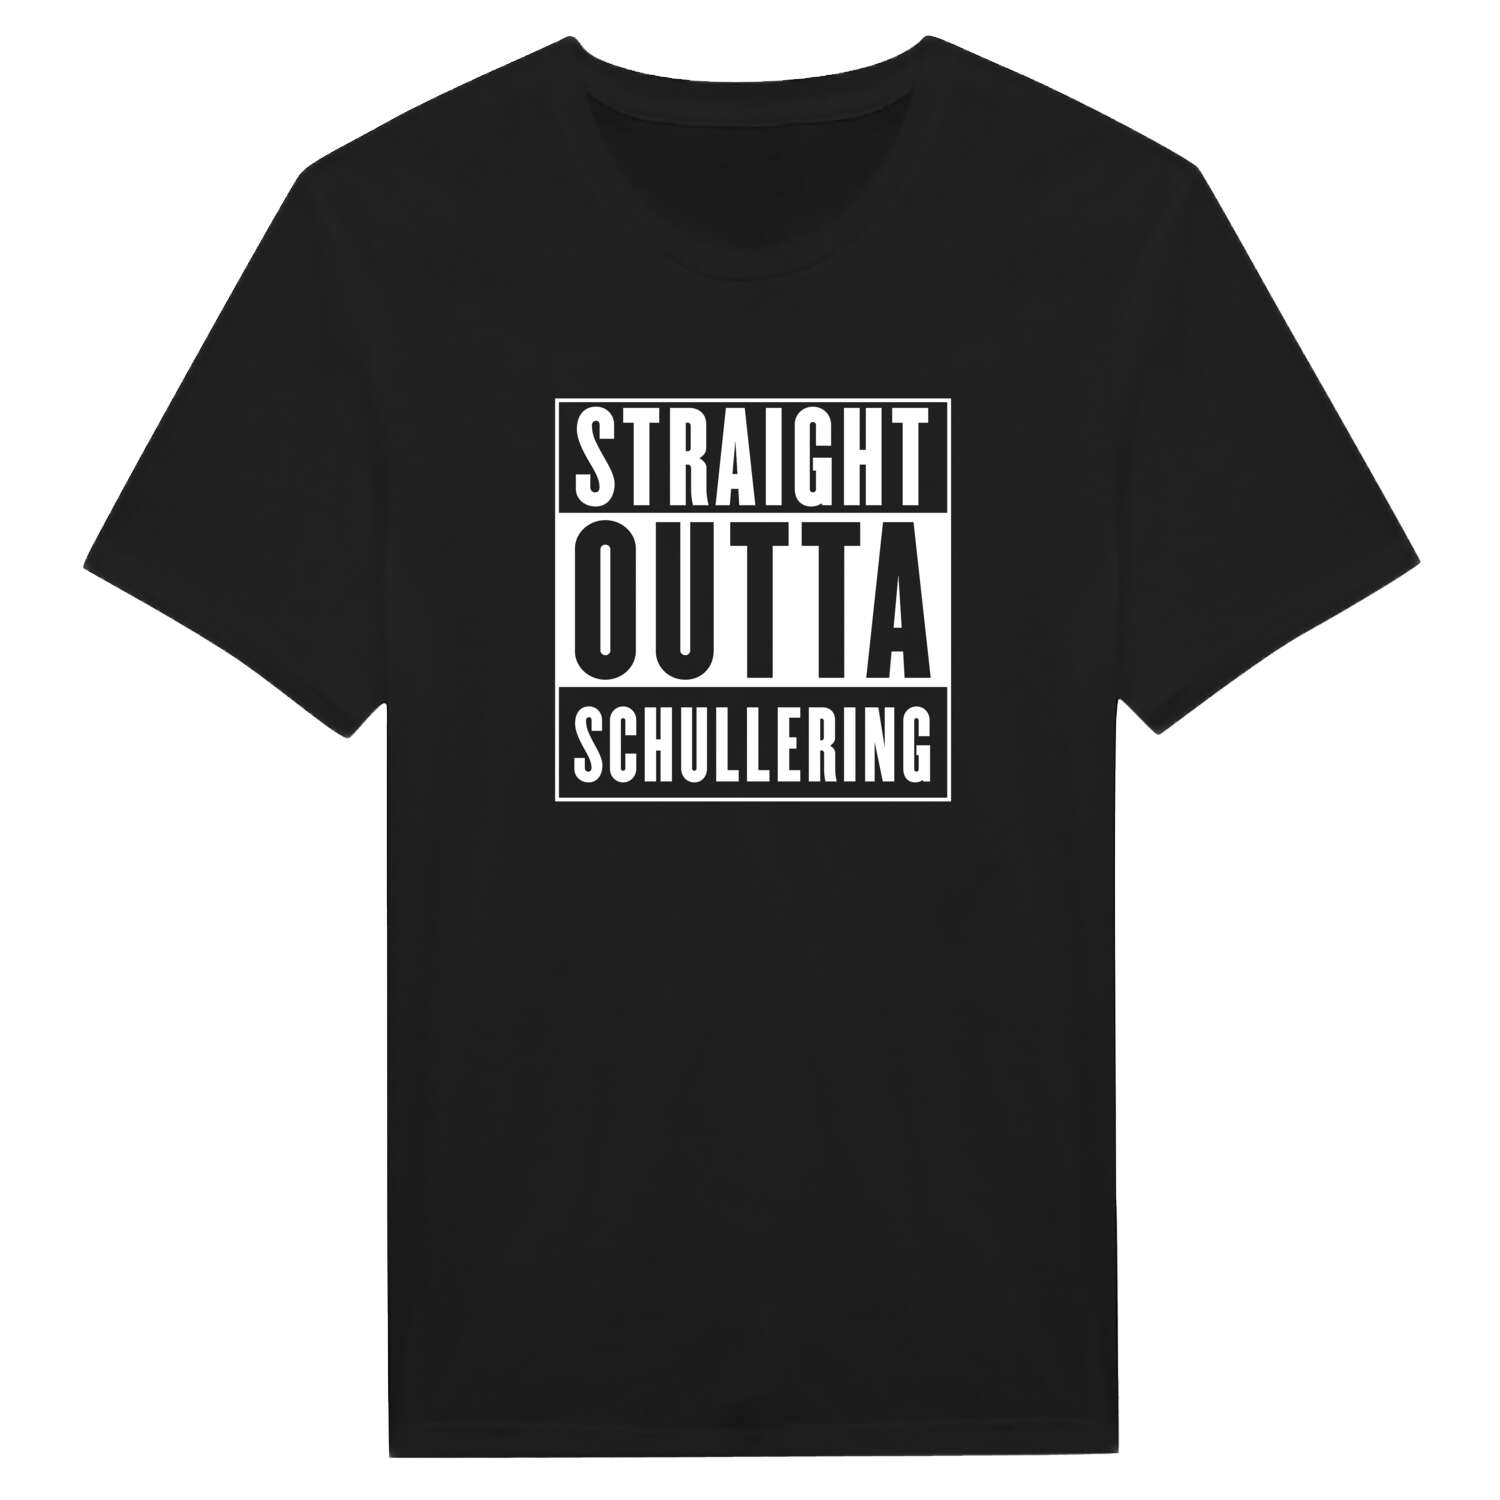 Schullering T-Shirt »Straight Outta«